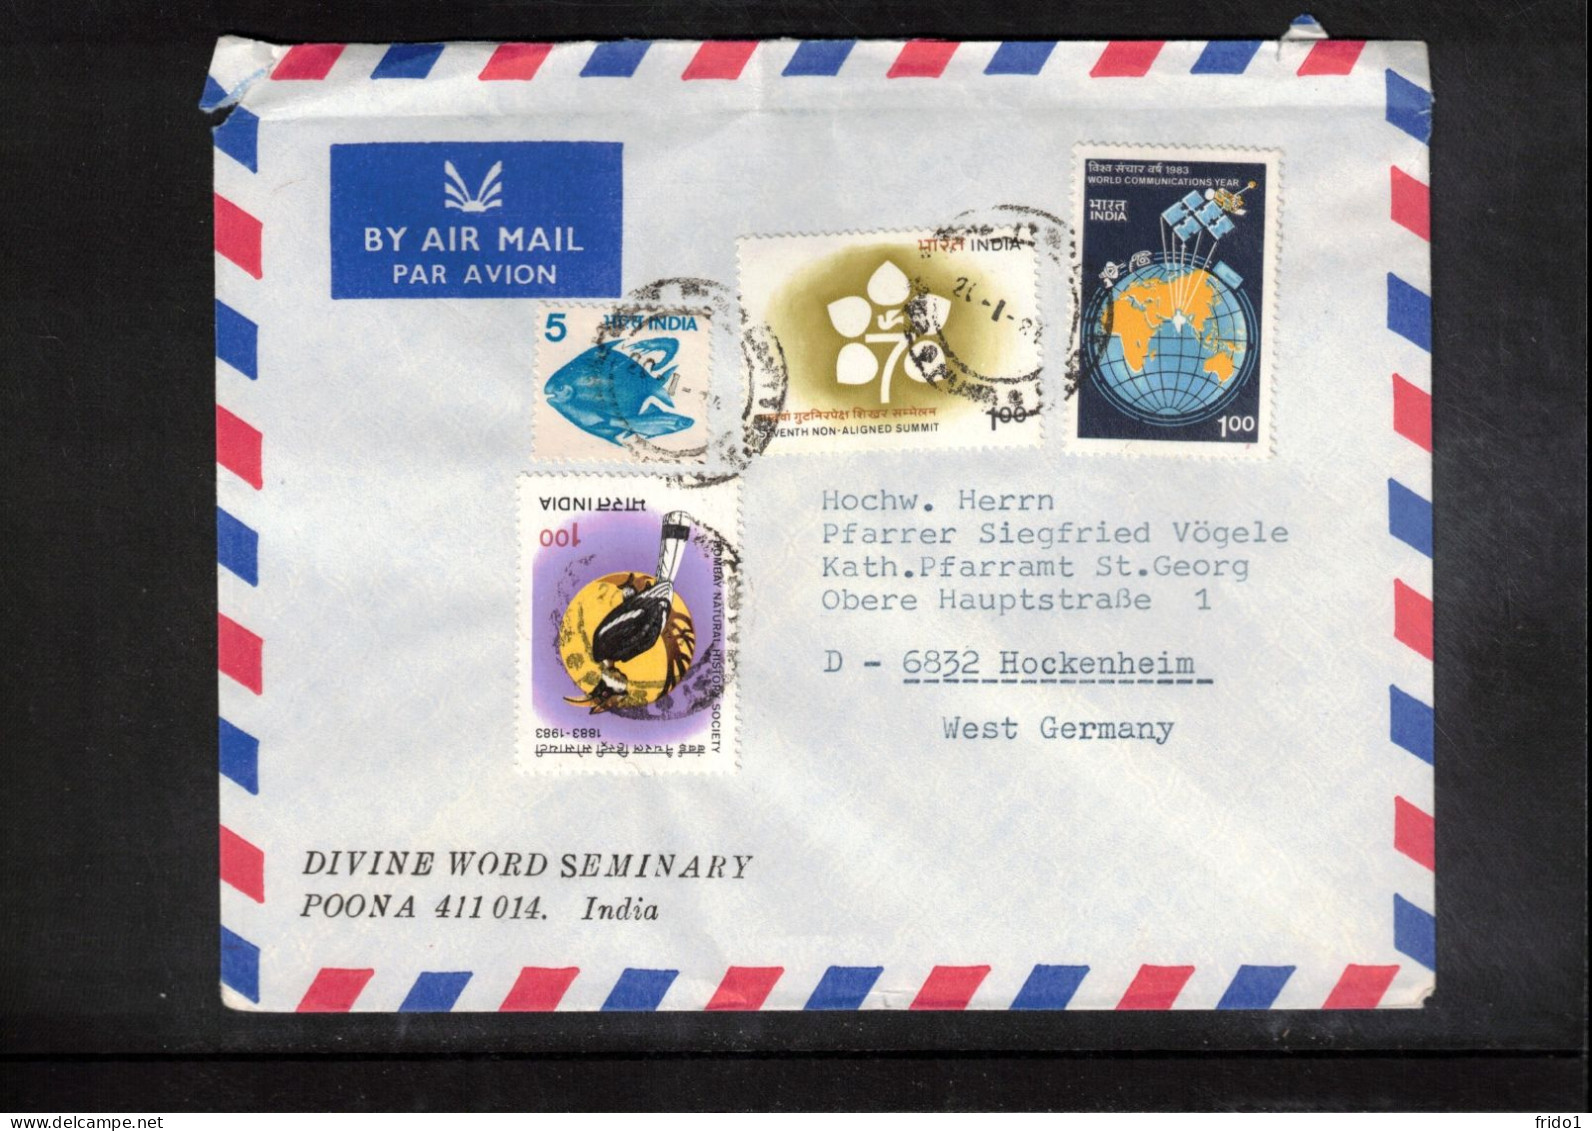 India Interesting Airmail Letter To Germany - Briefe U. Dokumente